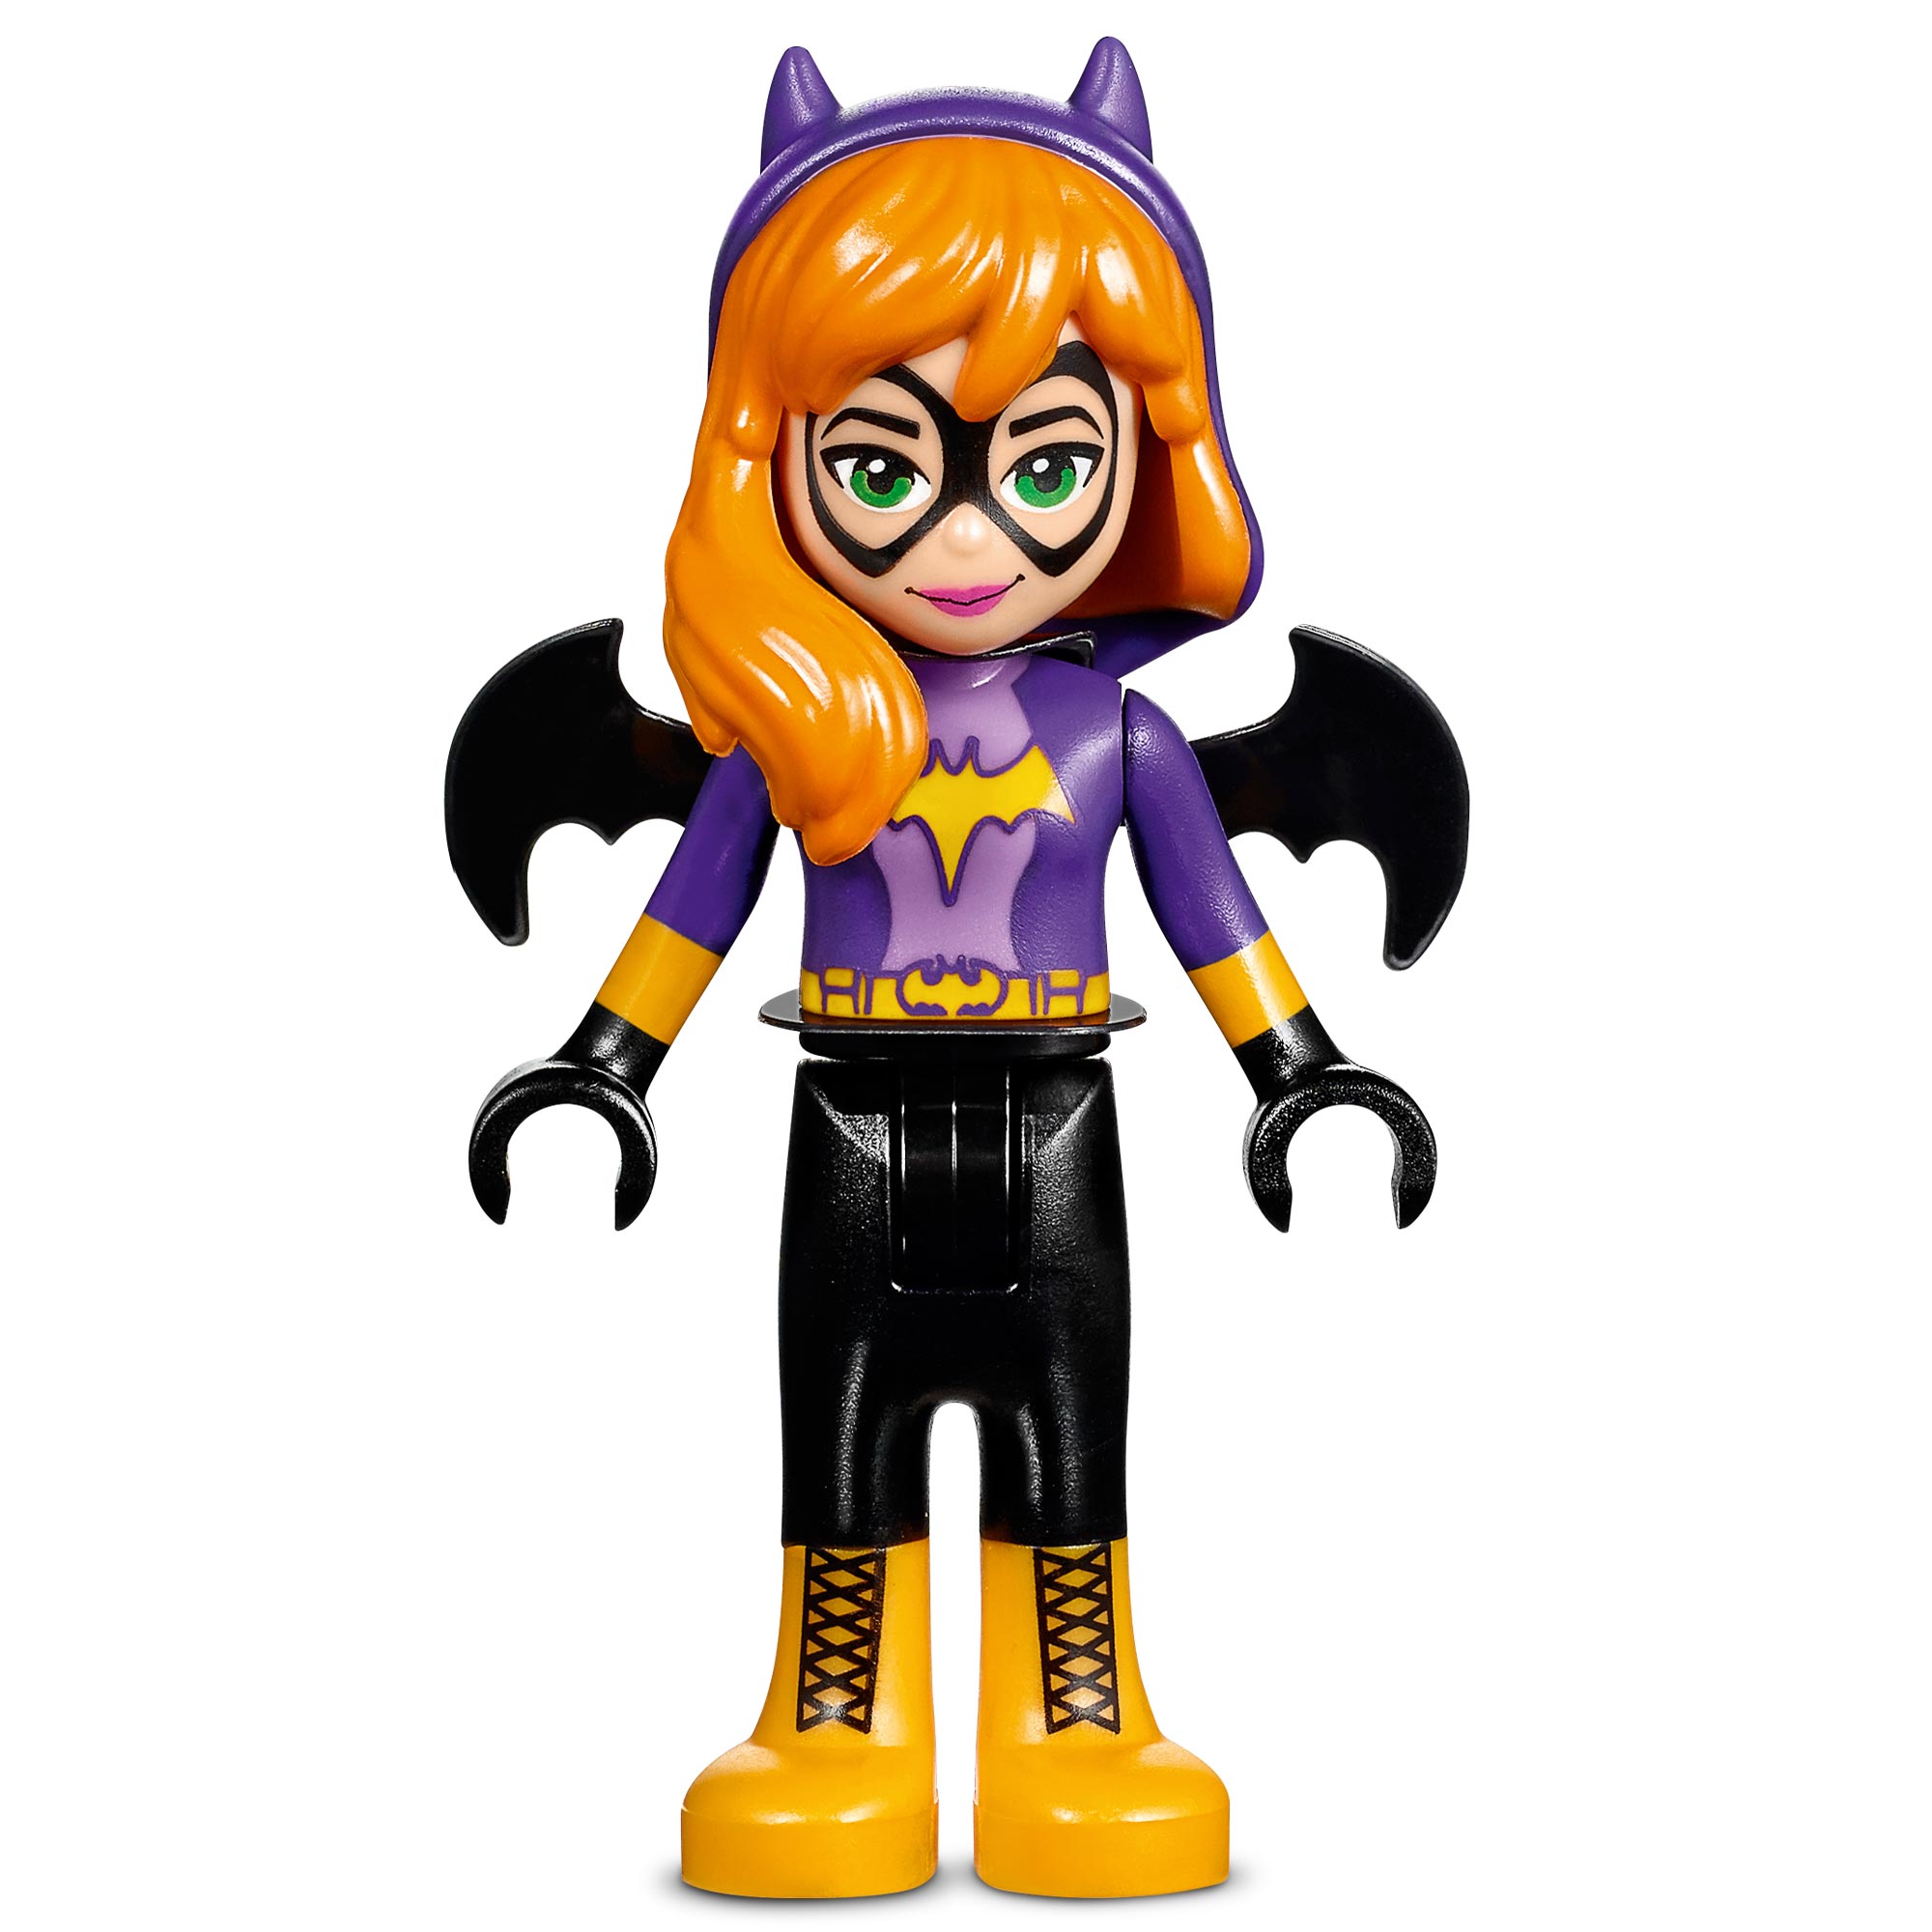 Join in the action-packed LEGO® DC Super Hero Girls™ world as Batgirl™ battles the yellow Kryptomite™ for her stolen ePad. This great set features a Batgirl mini-doll figure, the Batjet with opening cockpit, stud shooters on the wings and a net shooter at the front, plus Kryptomite buggy with an ePad and a fearful yellow Kryptomite.